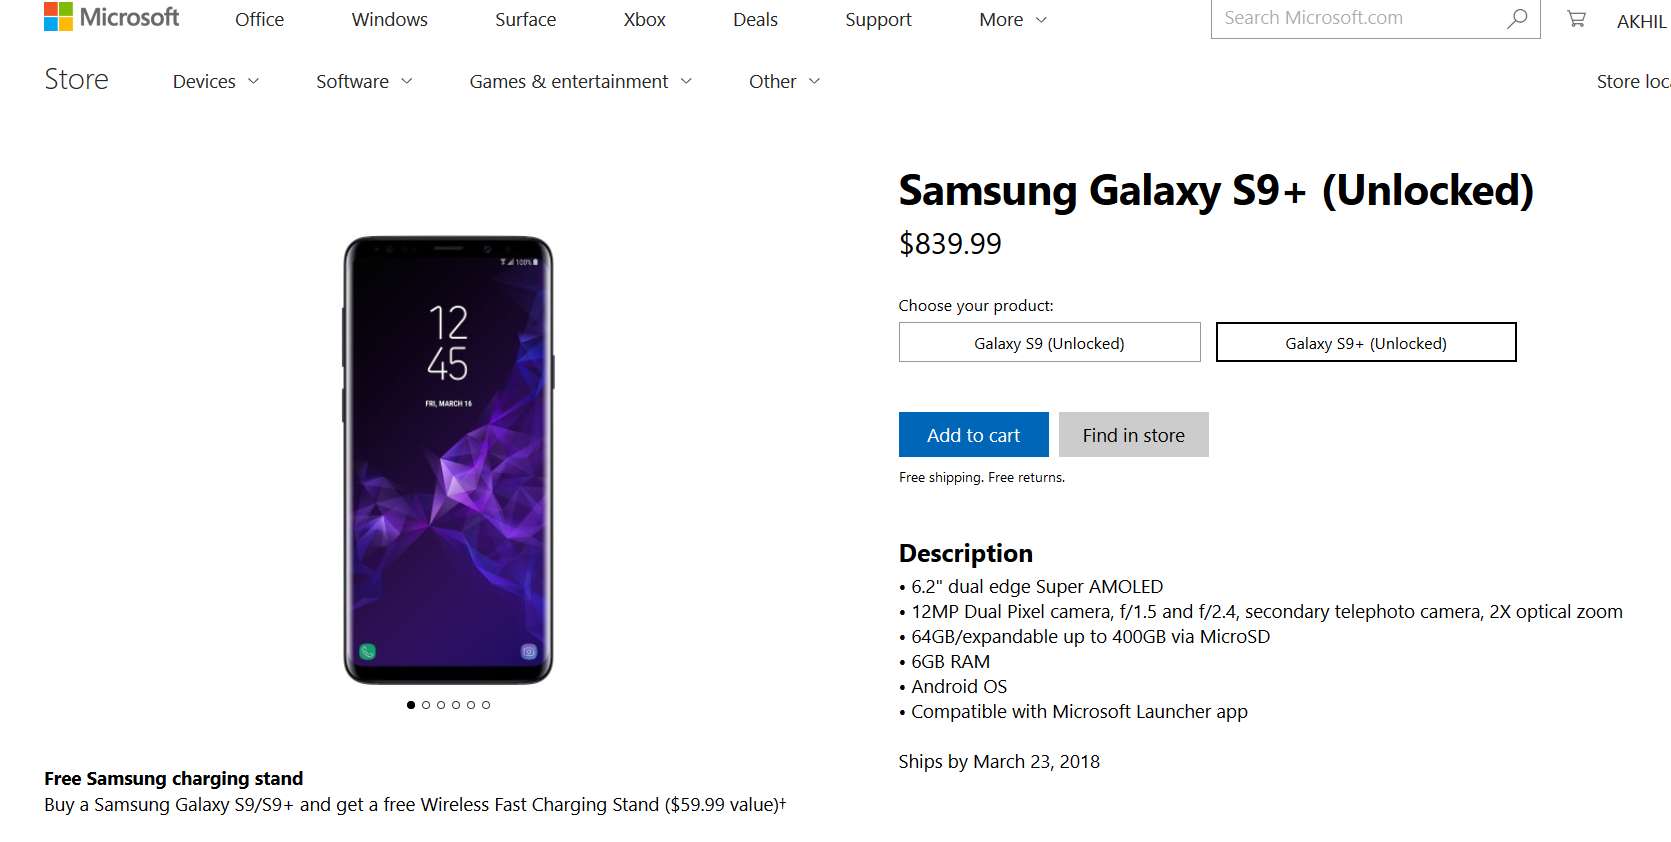 Microsoft Store sells non-Microsoft Edition Galaxy S9 devices with free wireless charger 2